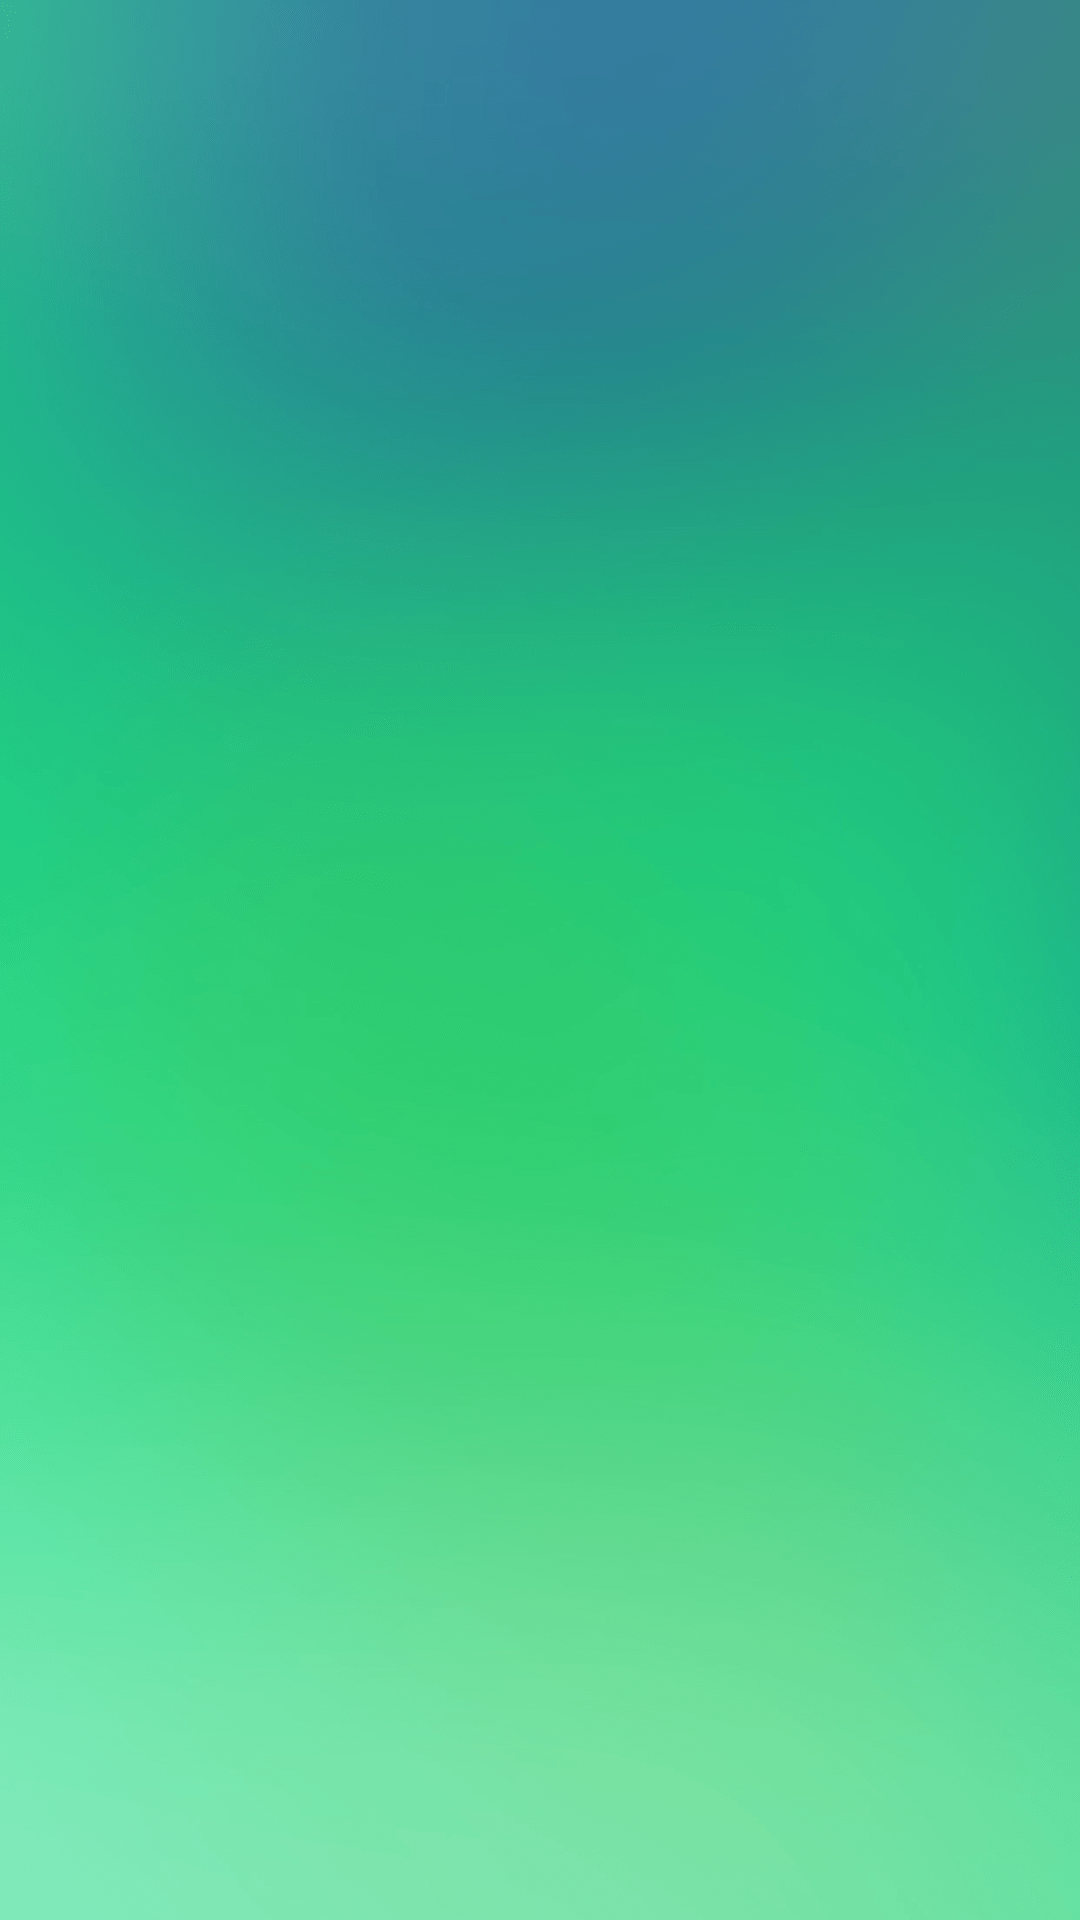 Here are the new iPhone 13 series green wallpapers